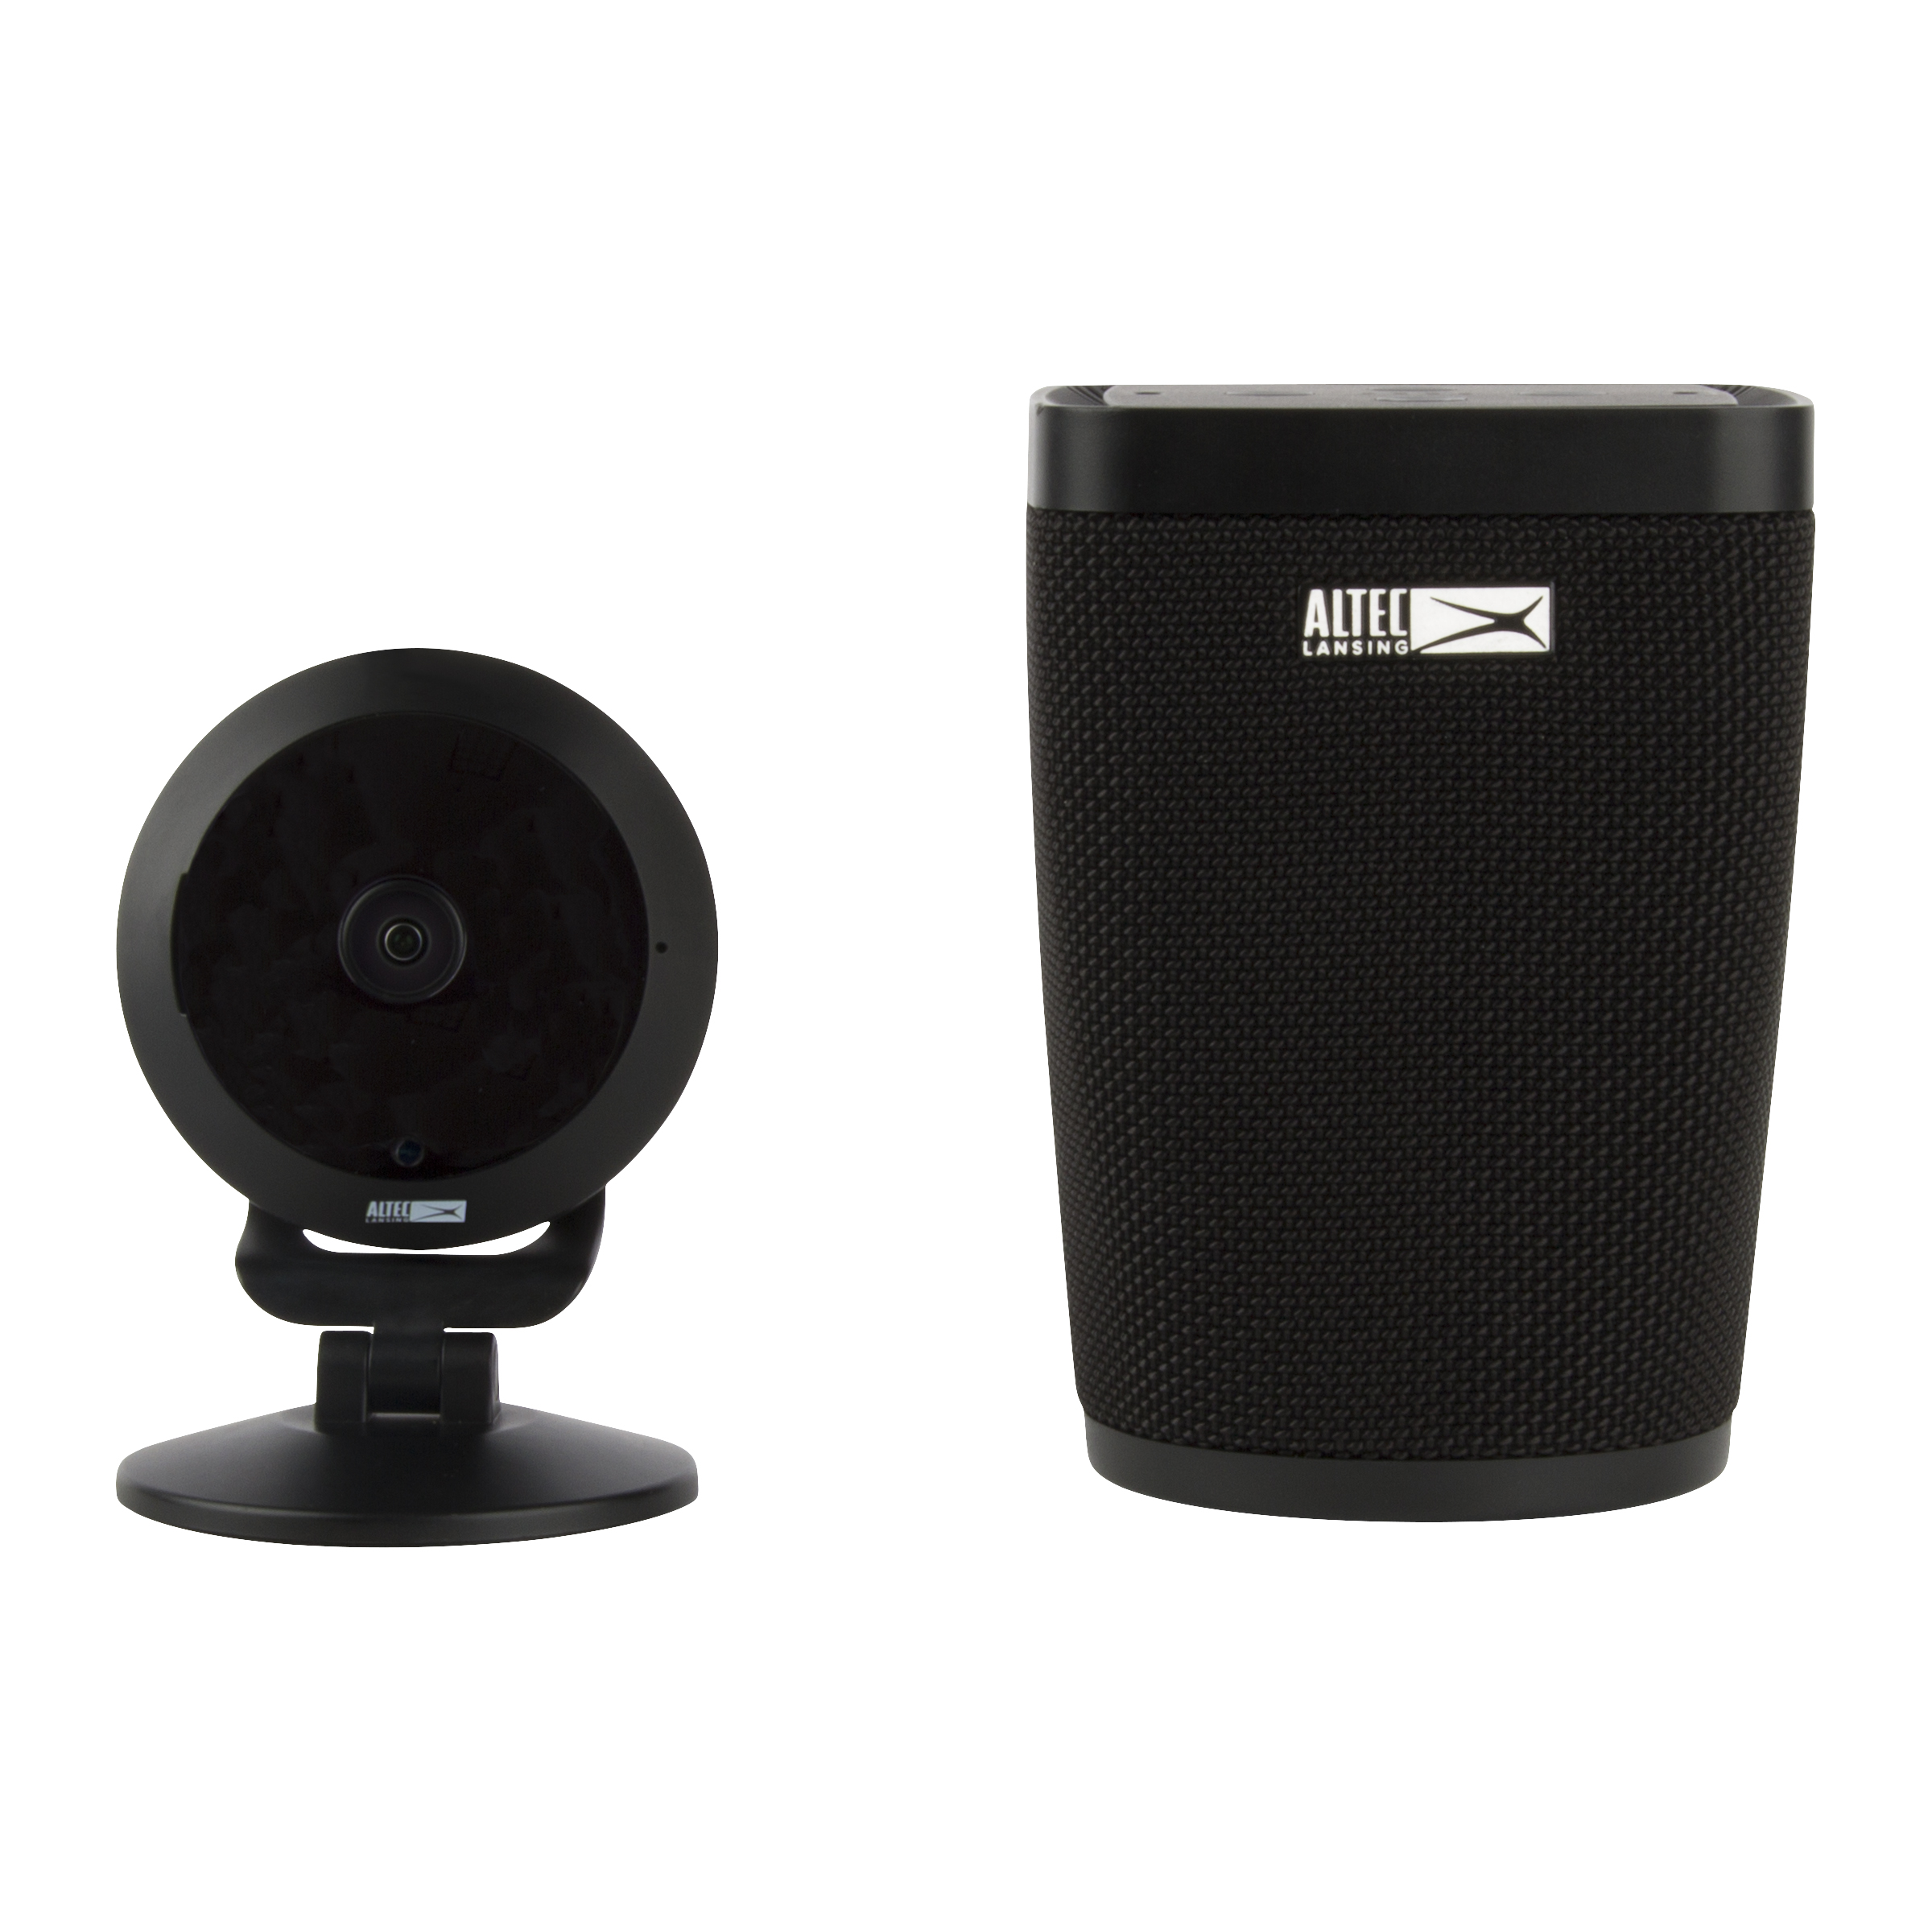 Altec Lansing Voice Activated Smart Security System bundle - image 1 of 4